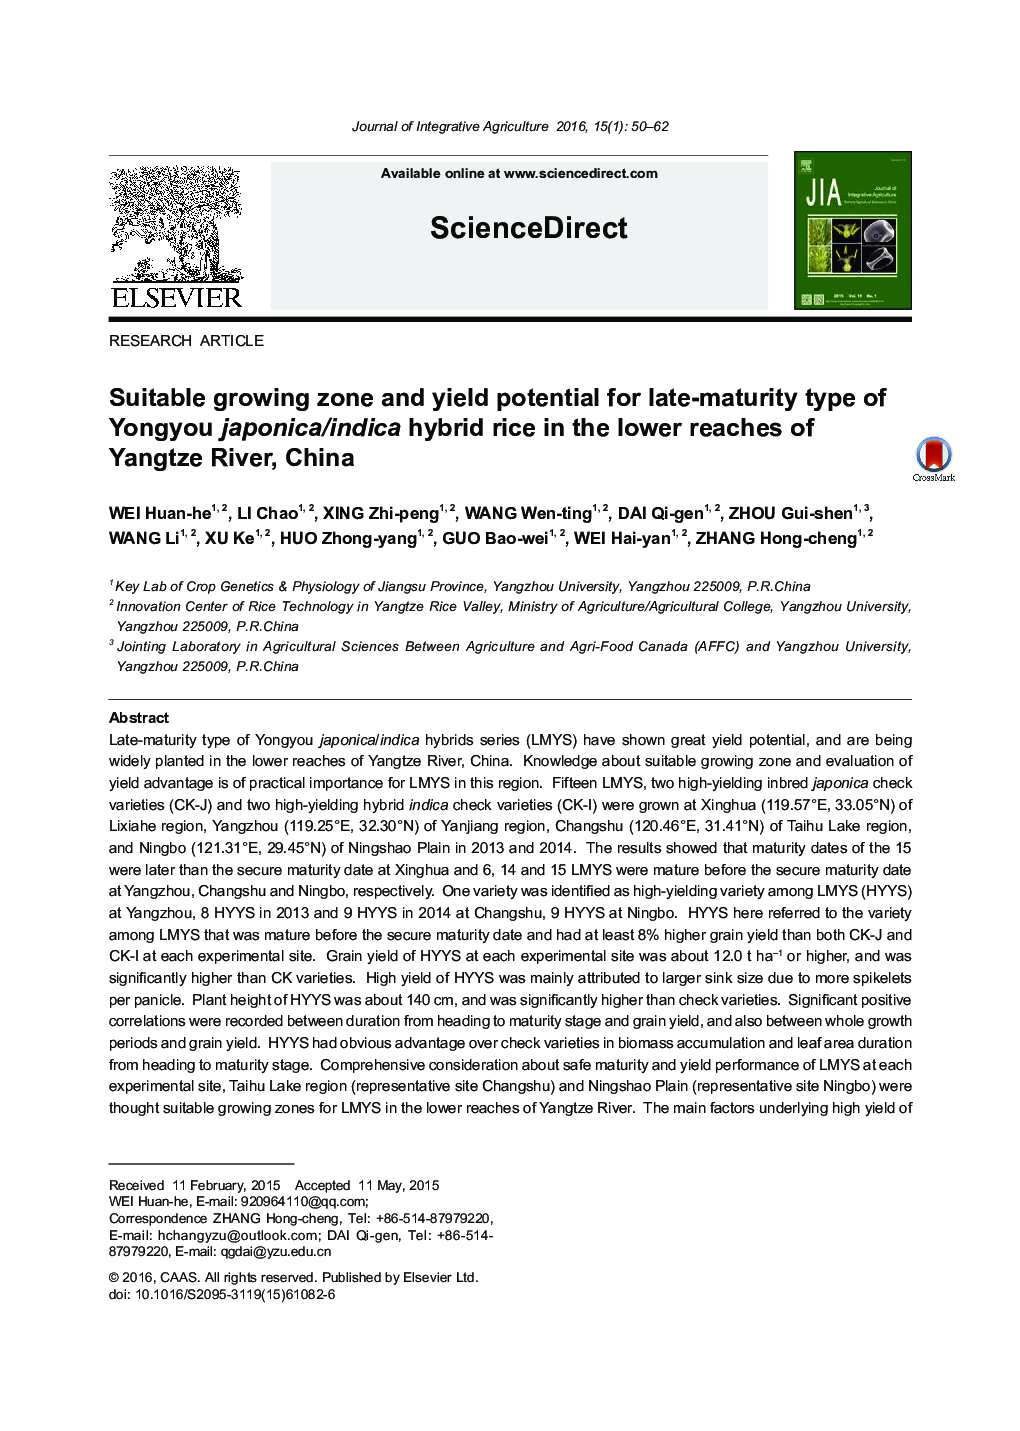 Suitable growing zone and yield potential for late-maturity type of Yongyou japonica/indica hybrid rice in the lower reaches of Yangtze River, China